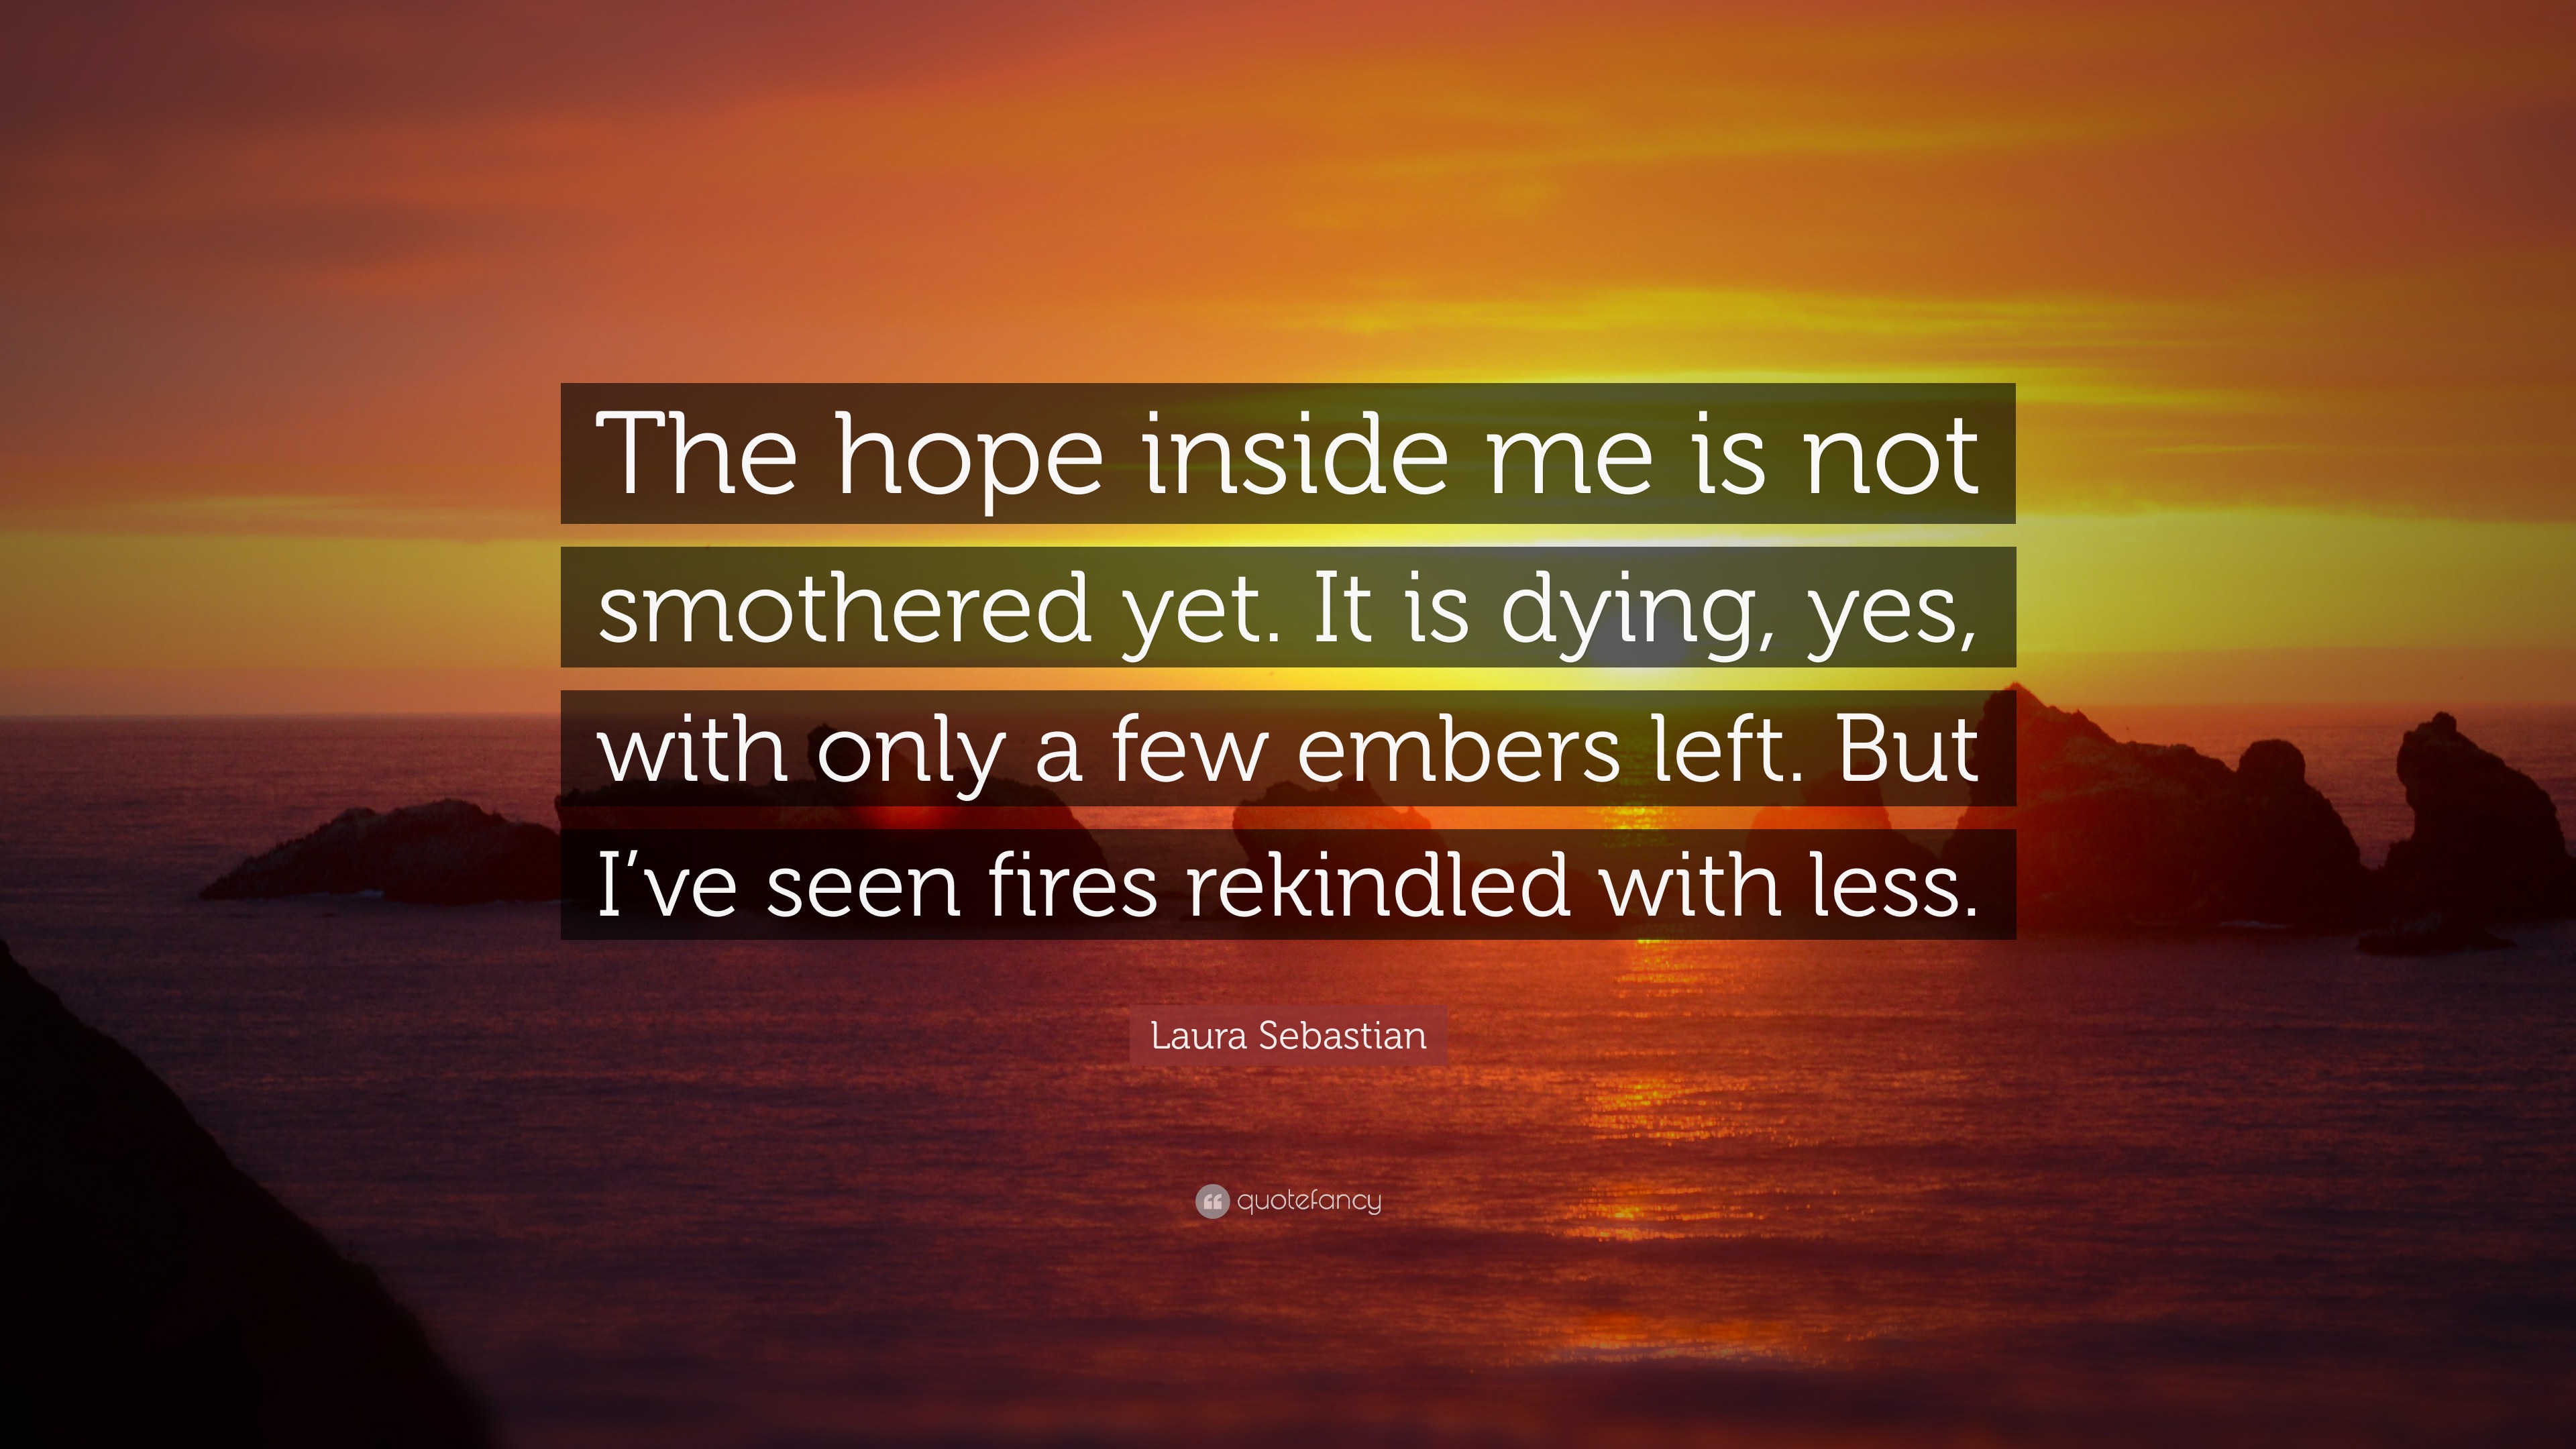 Laura Sebastian Quote: “The hope inside me is not smothered yet. It is  dying, yes, with only a few embers left. But I've seen fires rekindled  wi”